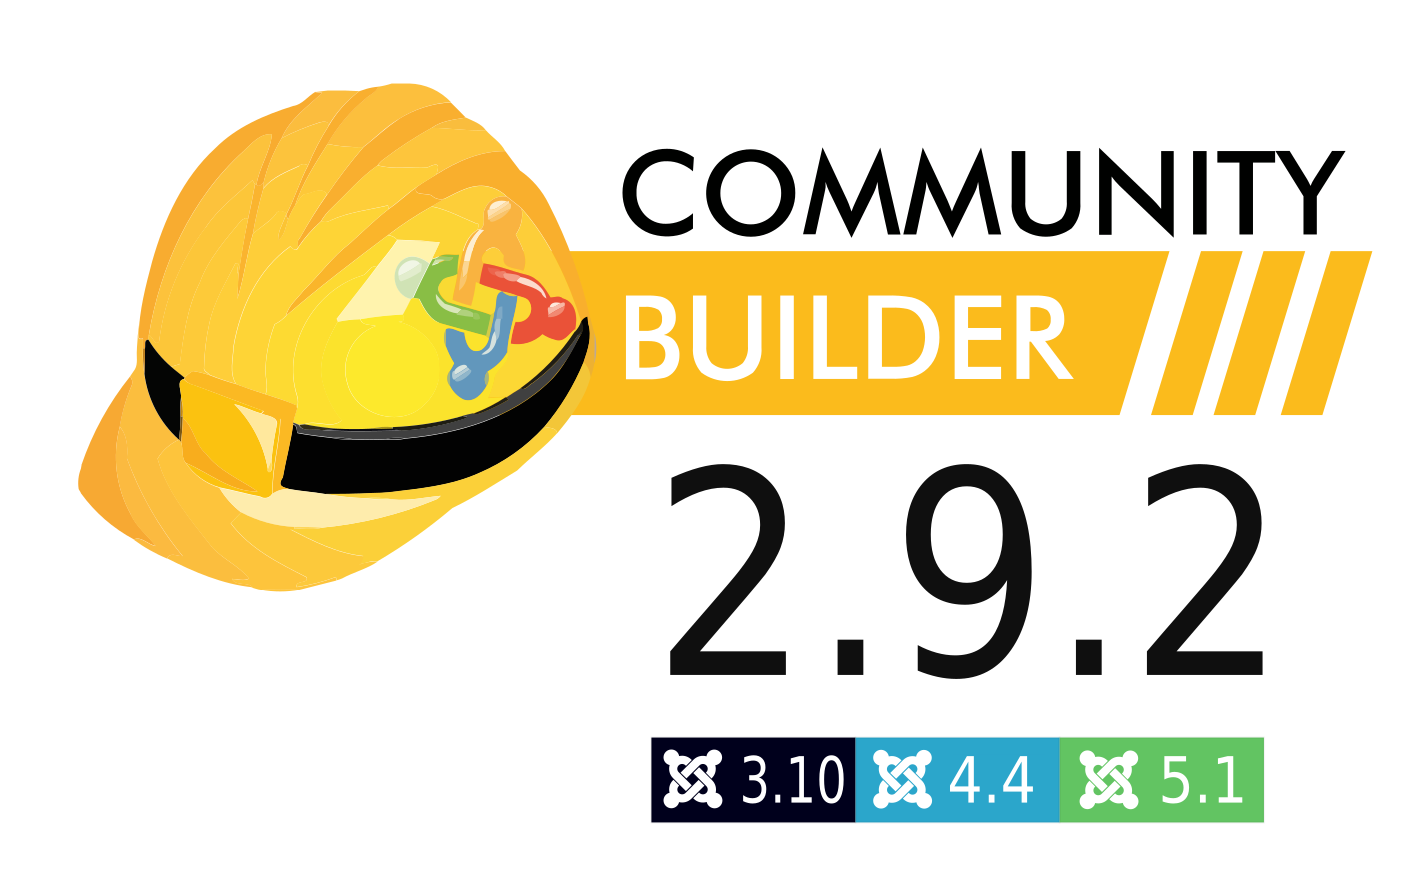 Community Builder 2.9.2, tested on Joomla 5.1, 4.4 and 3.10